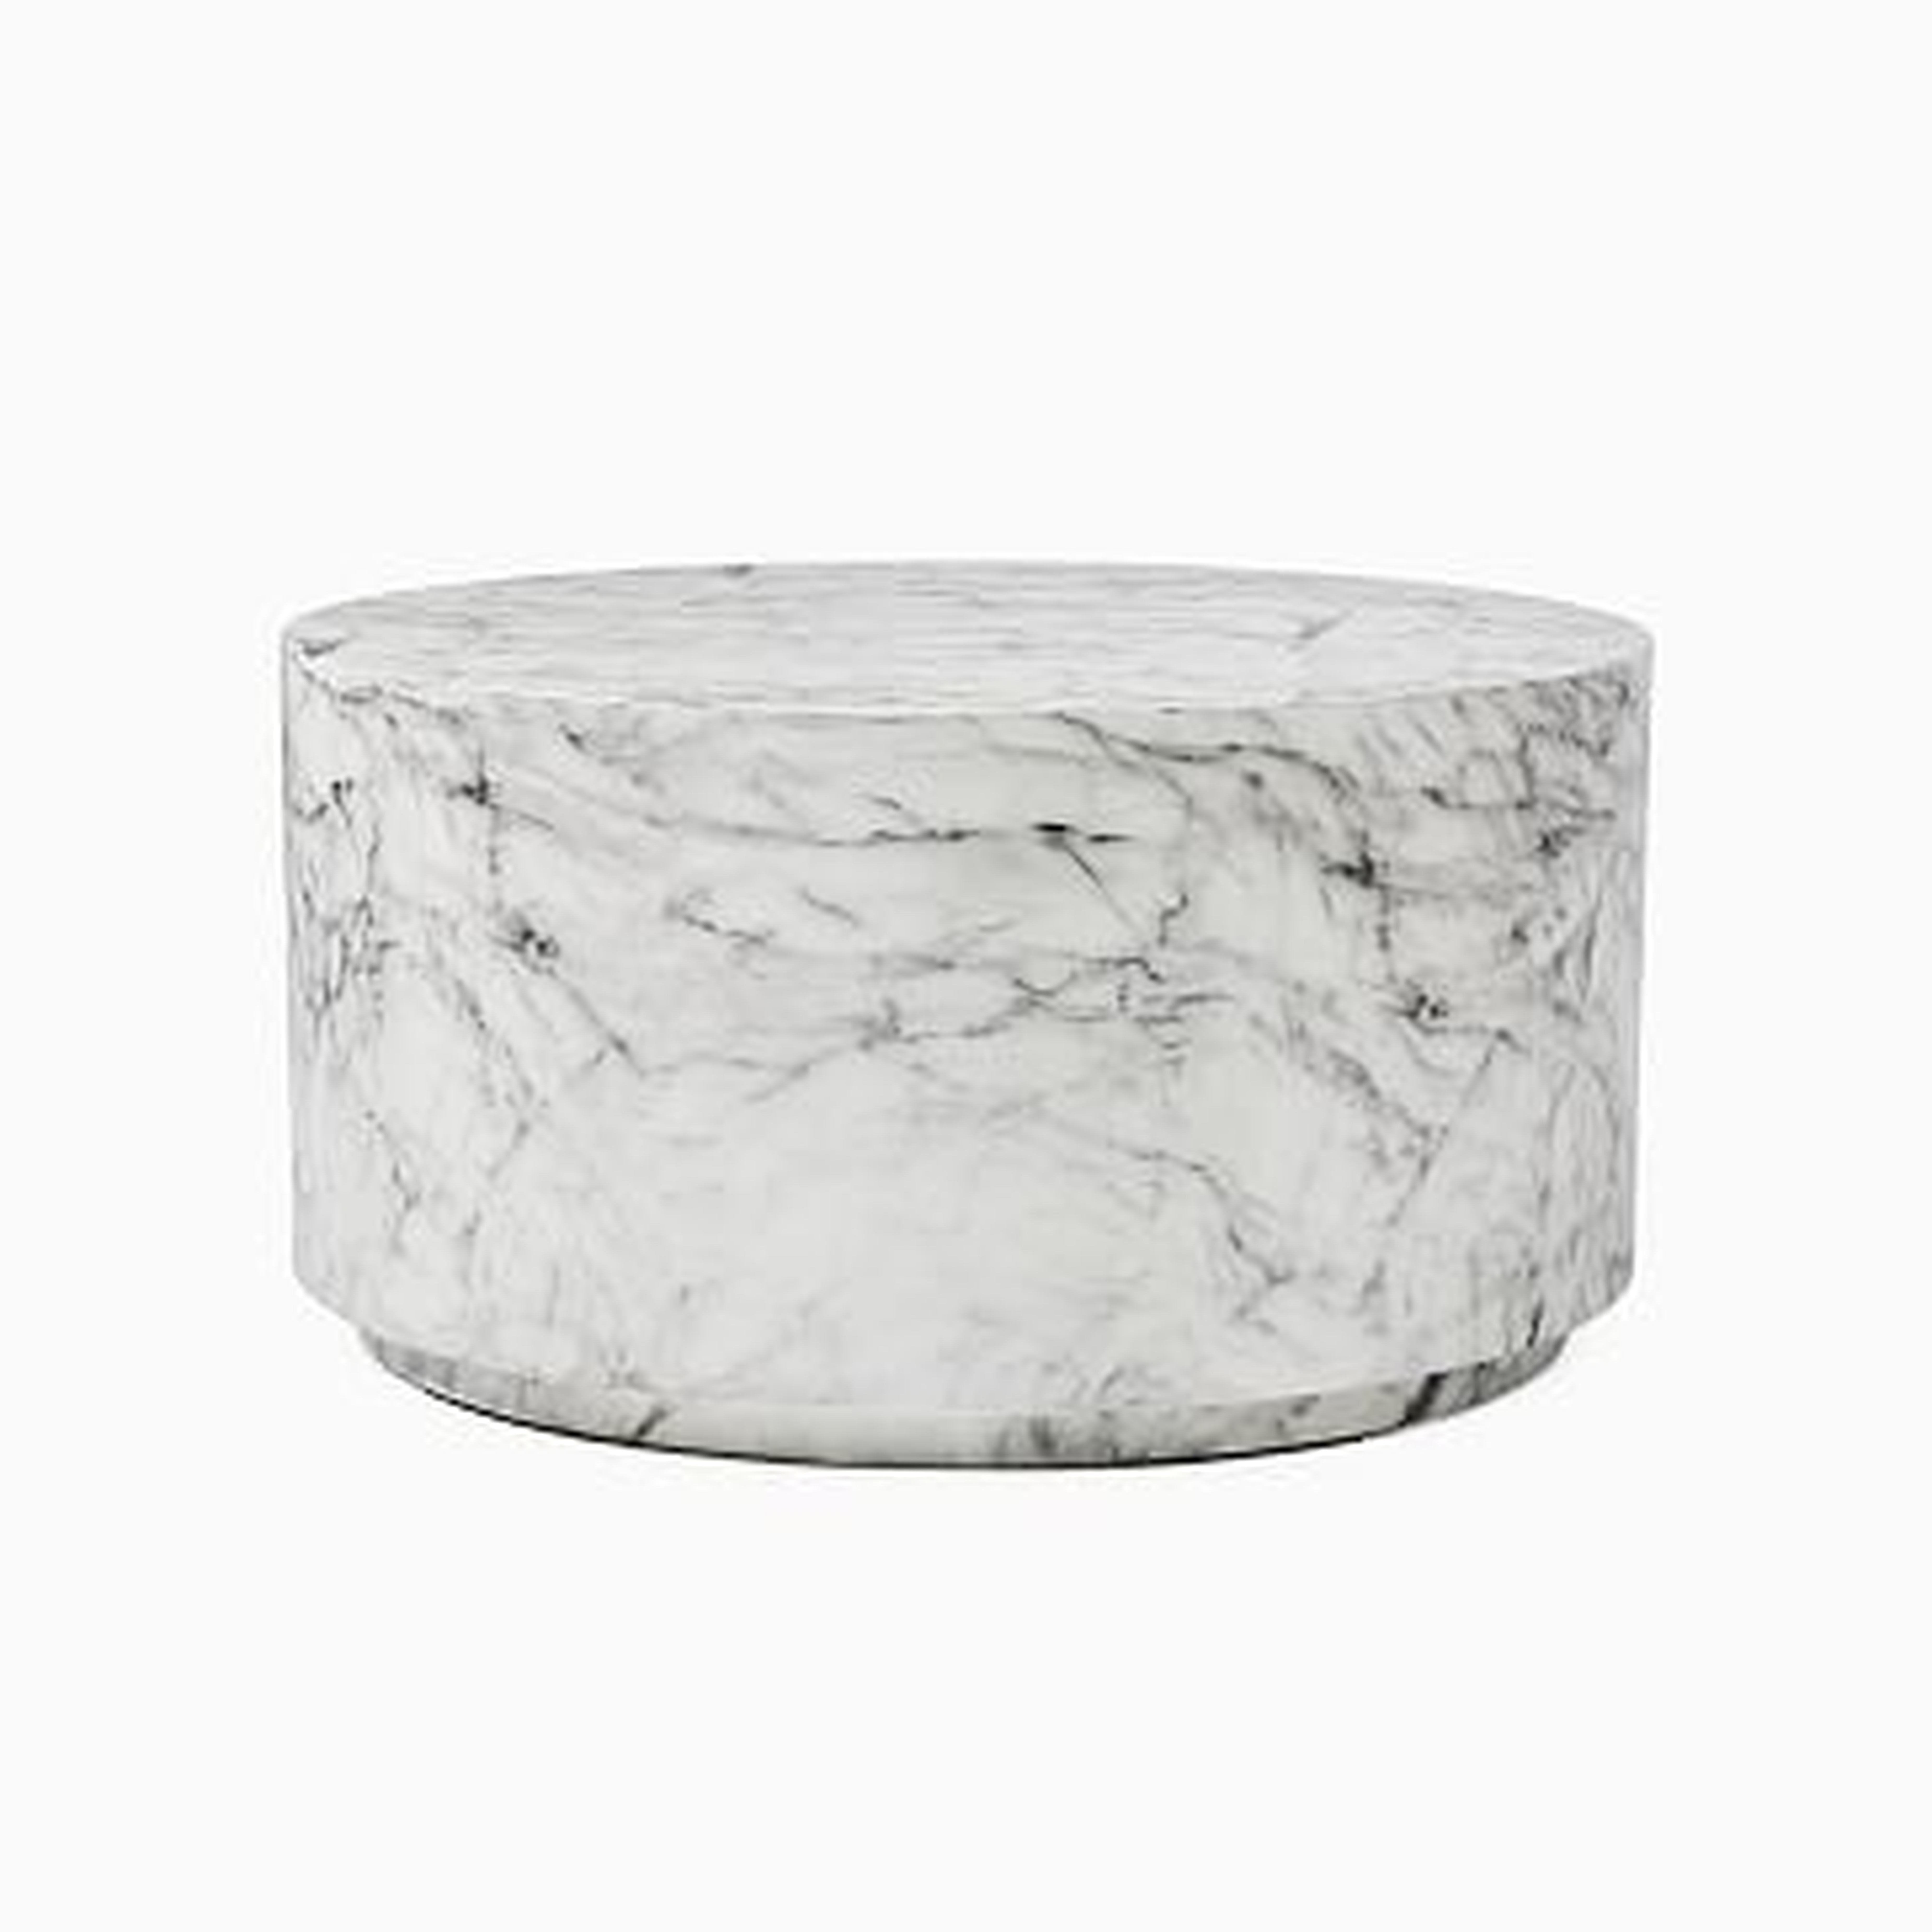 Marbled Drum Coffee Table, White, 32" Round - West Elm